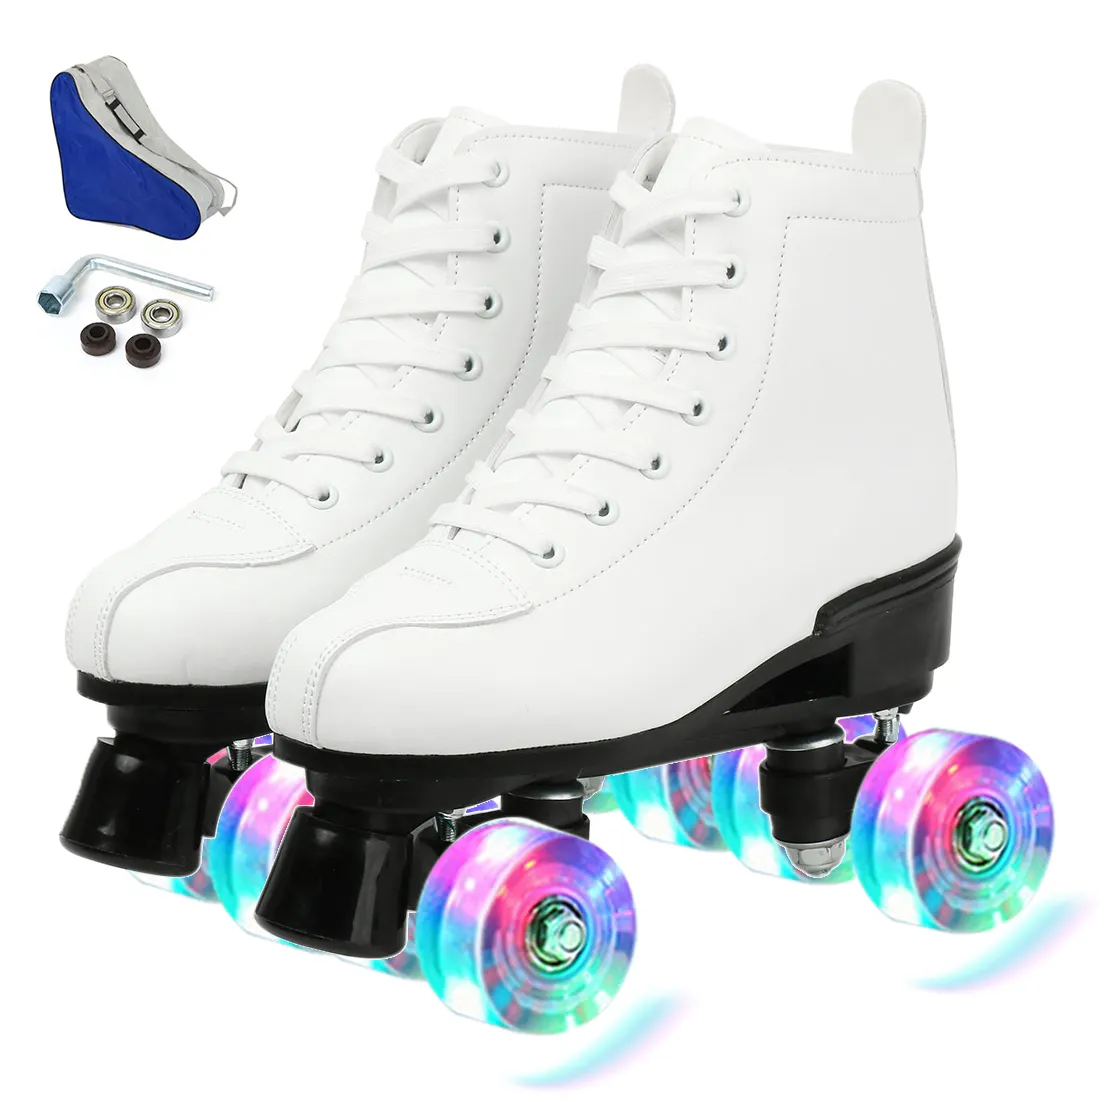 Premium PU Leather High-top Four-Wheel Roller Skates Rechargeable Shiny Roller Skates for Unisex Youth Adults Roller Skates Classic Roller Skates